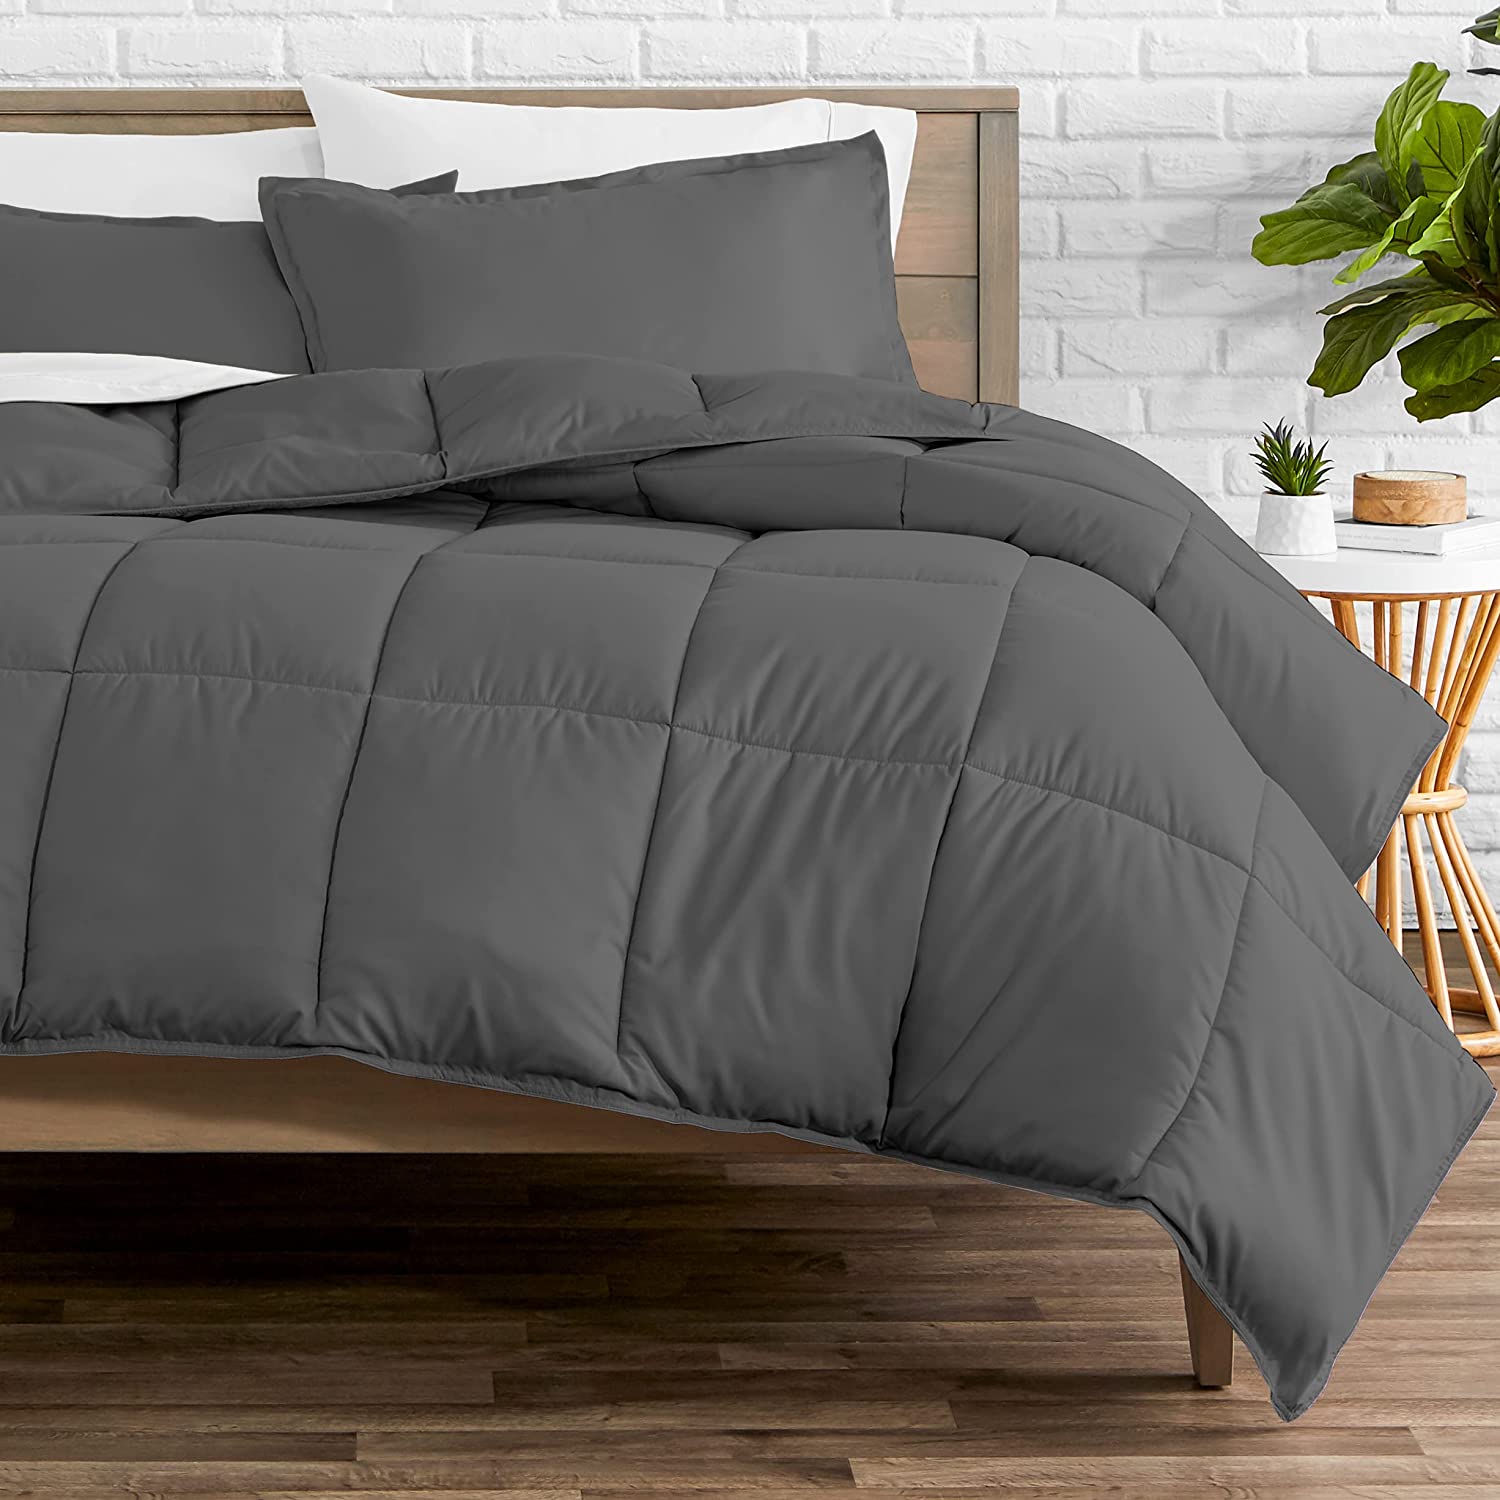 The Best Twin Comforter Sets December, Twin Size Bedding